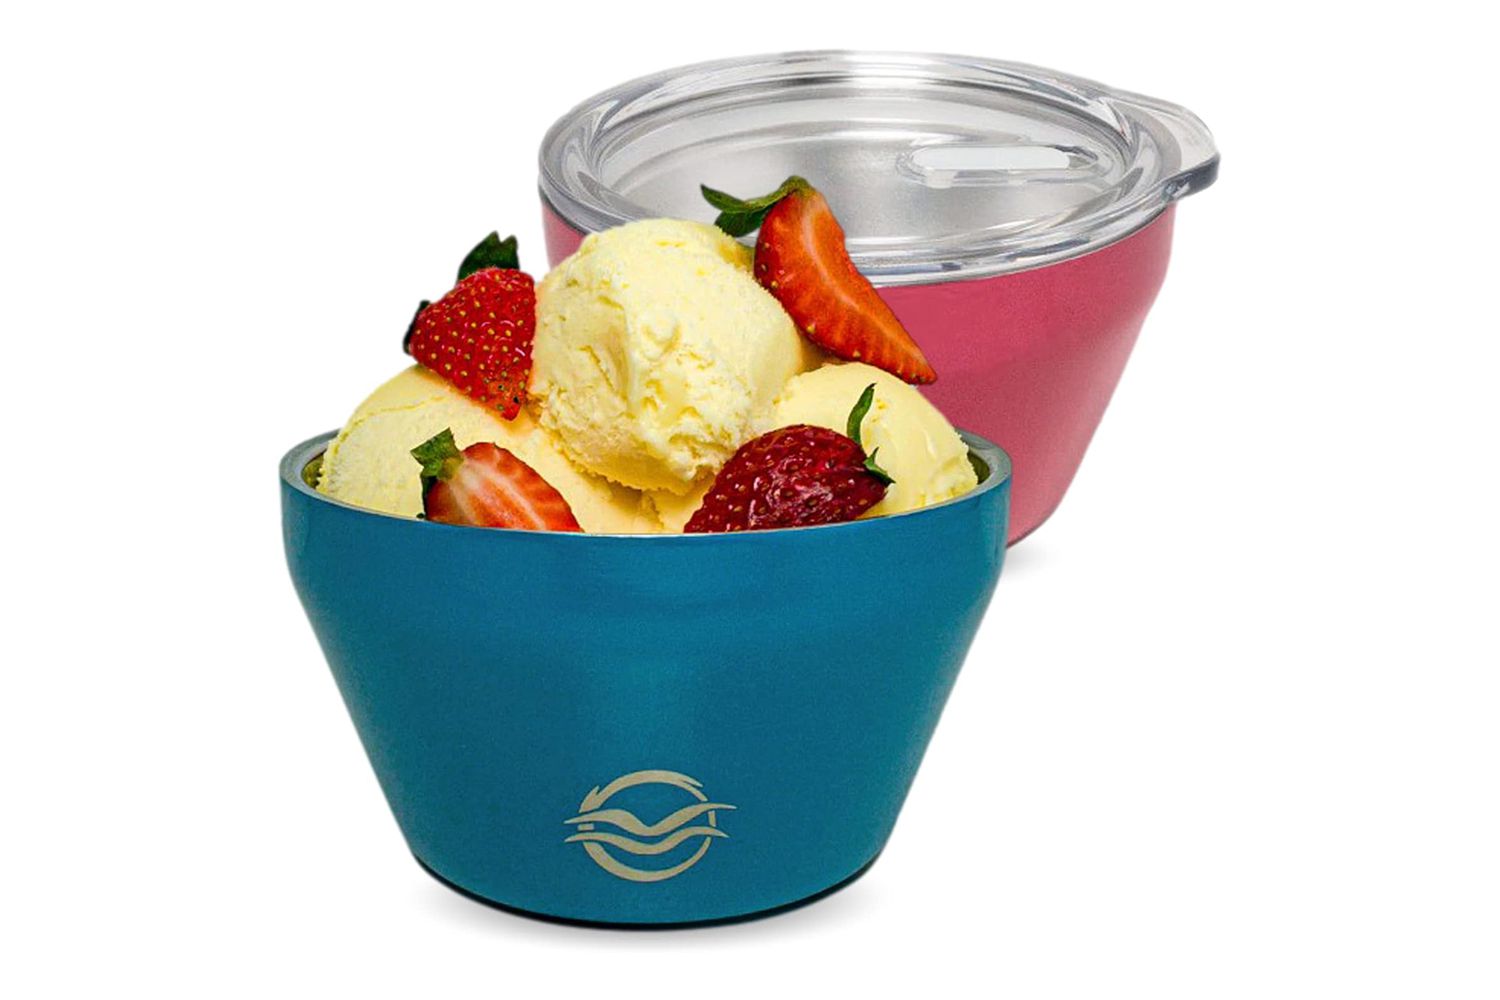 CALICLE Insulated Ice Cream Bowl Set with Lid